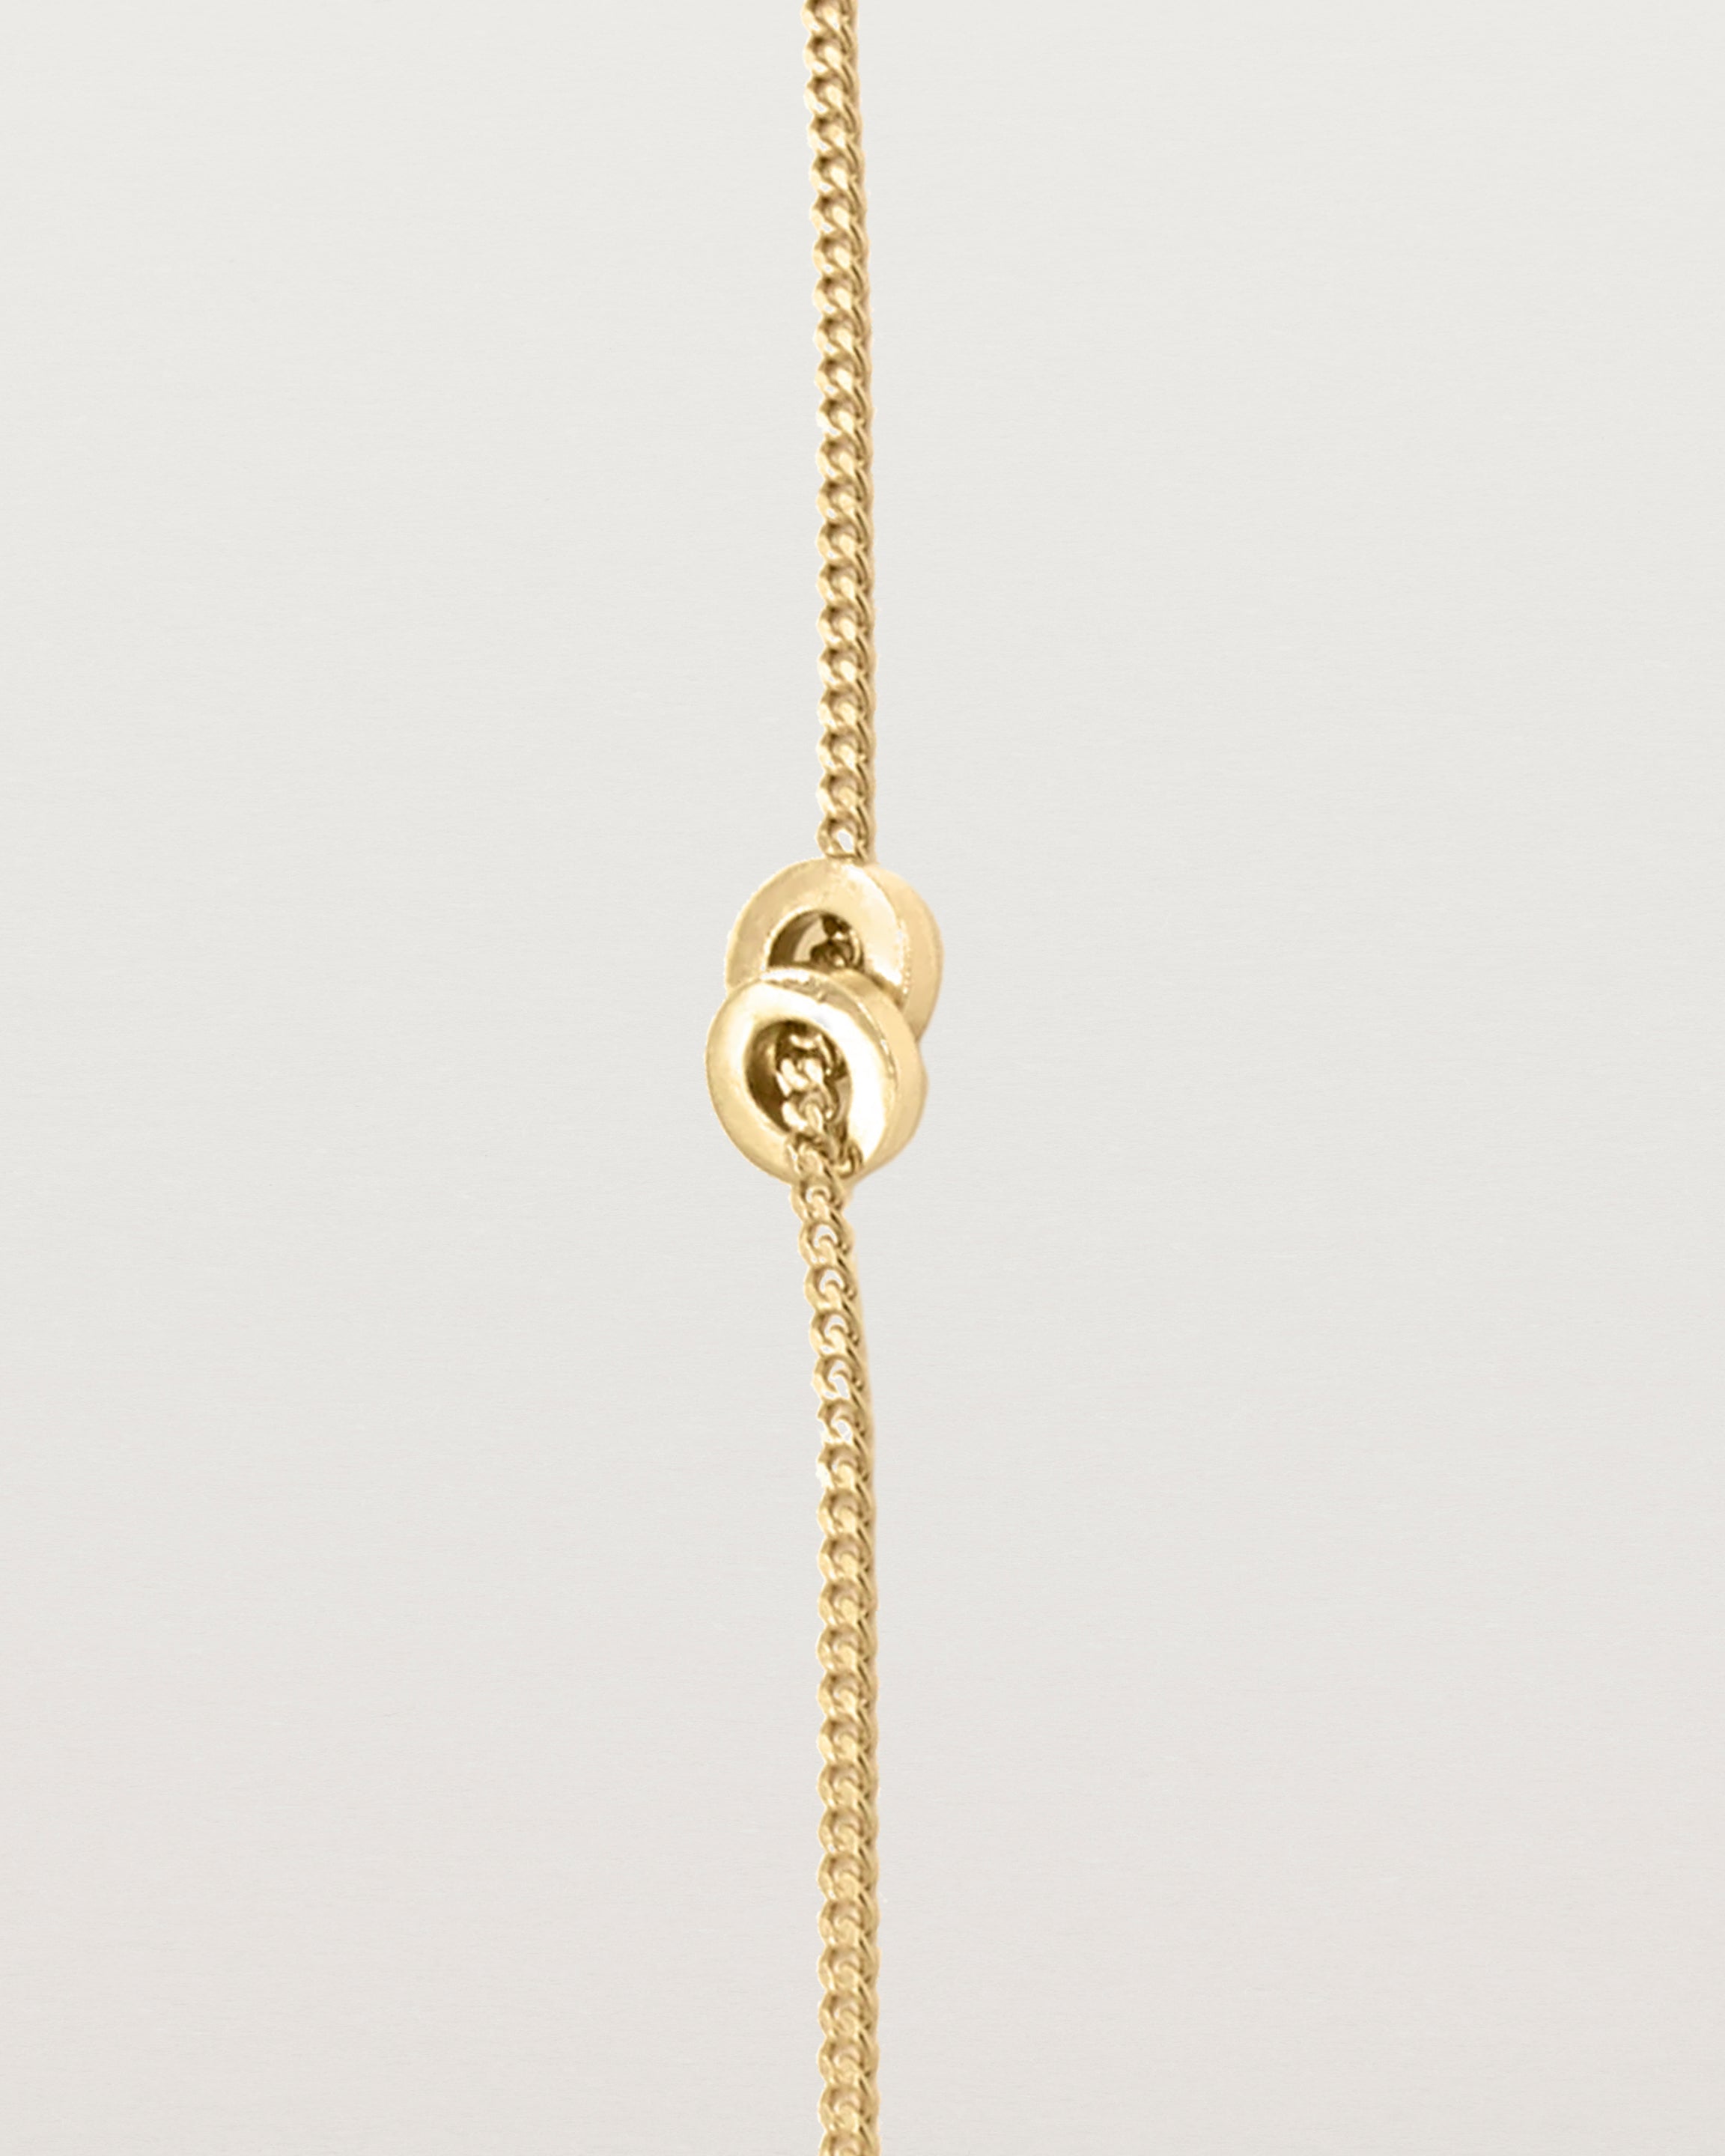 A fine yellow gold chain bracelet featuring a square circular charm